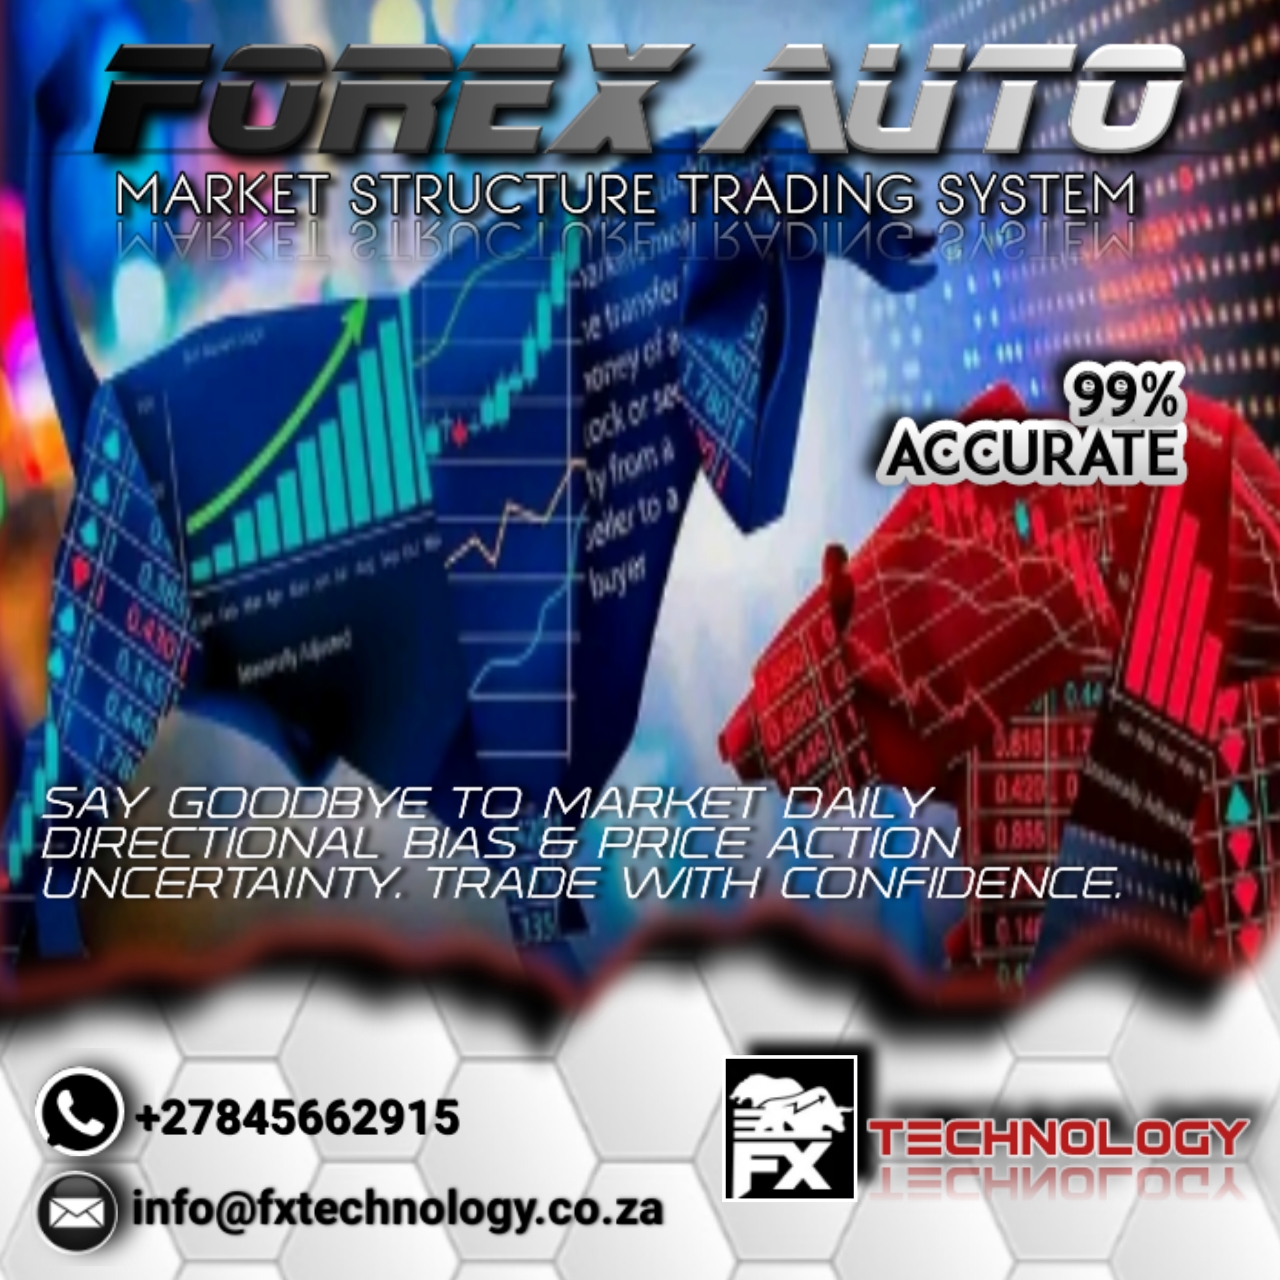 Forex Auto Market Structure Trading System.